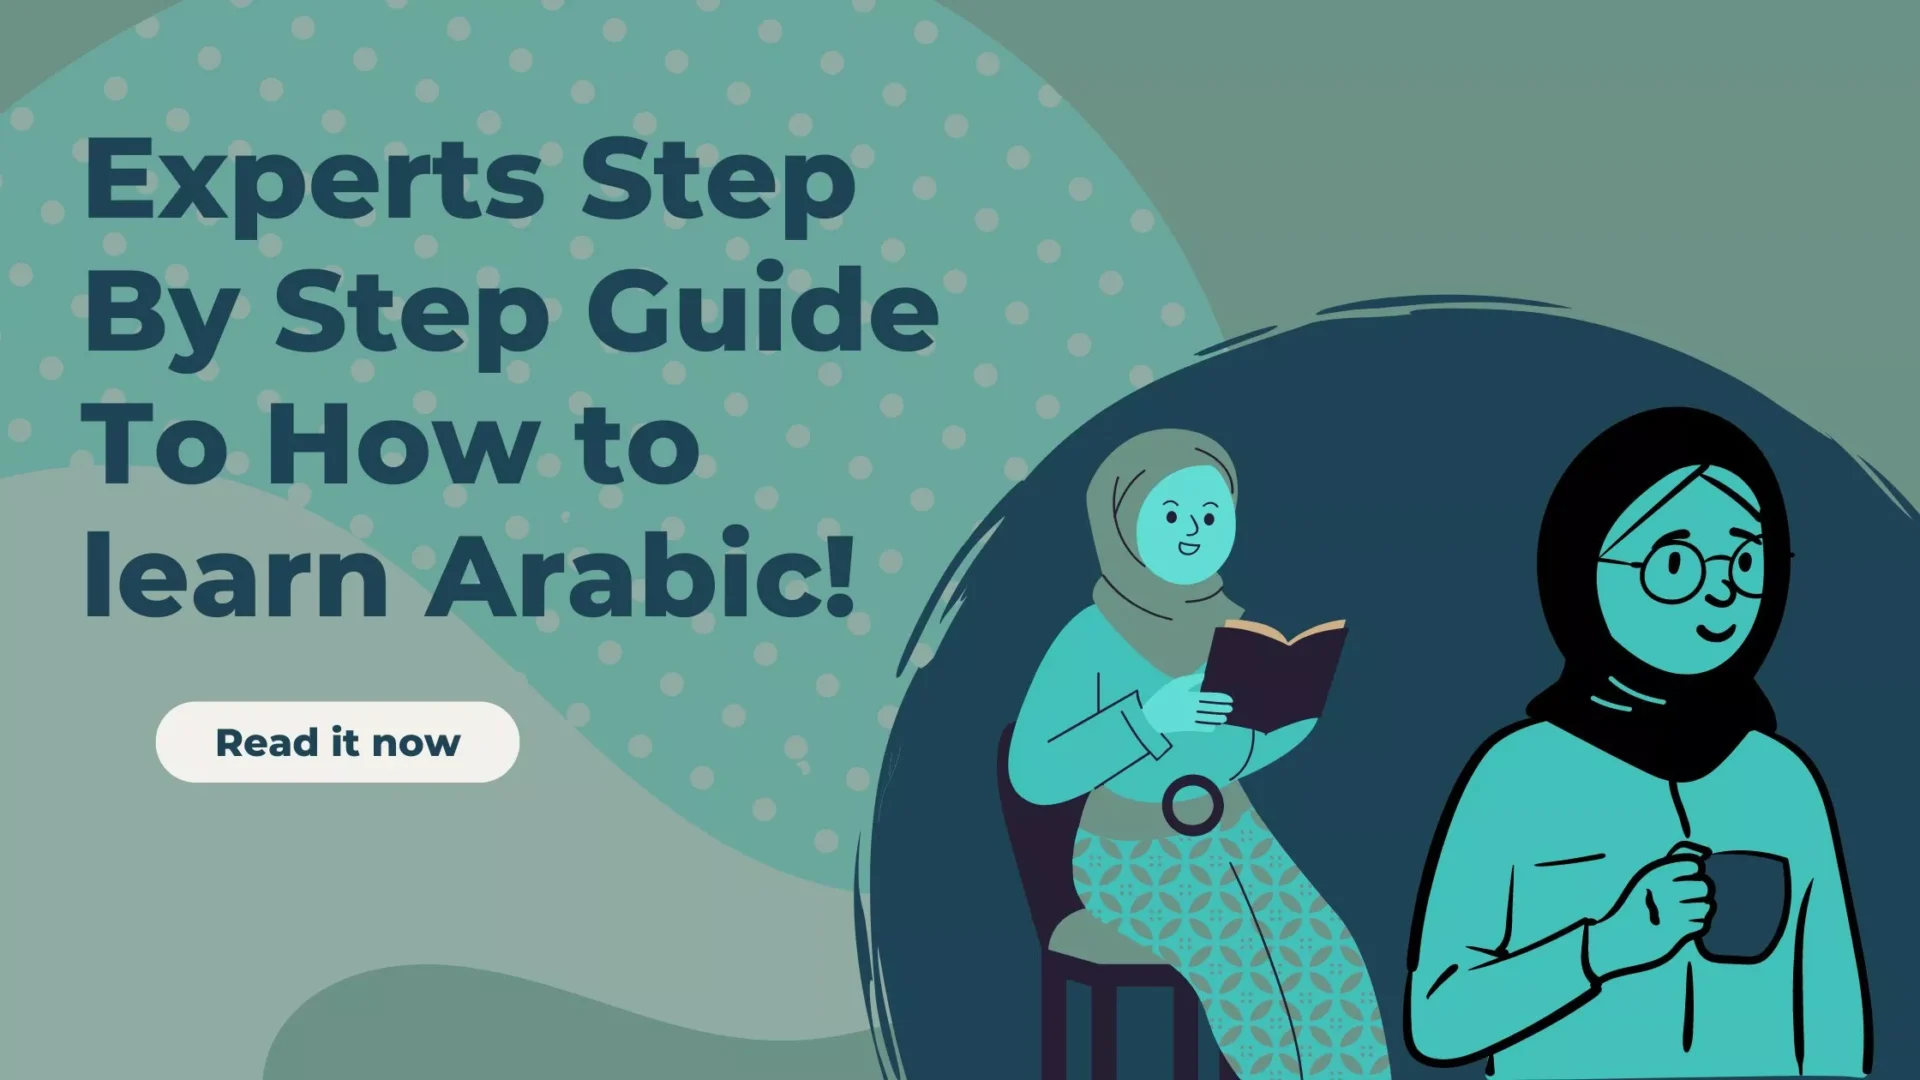 Experts Step By Step Guide To How to learn Arabic!